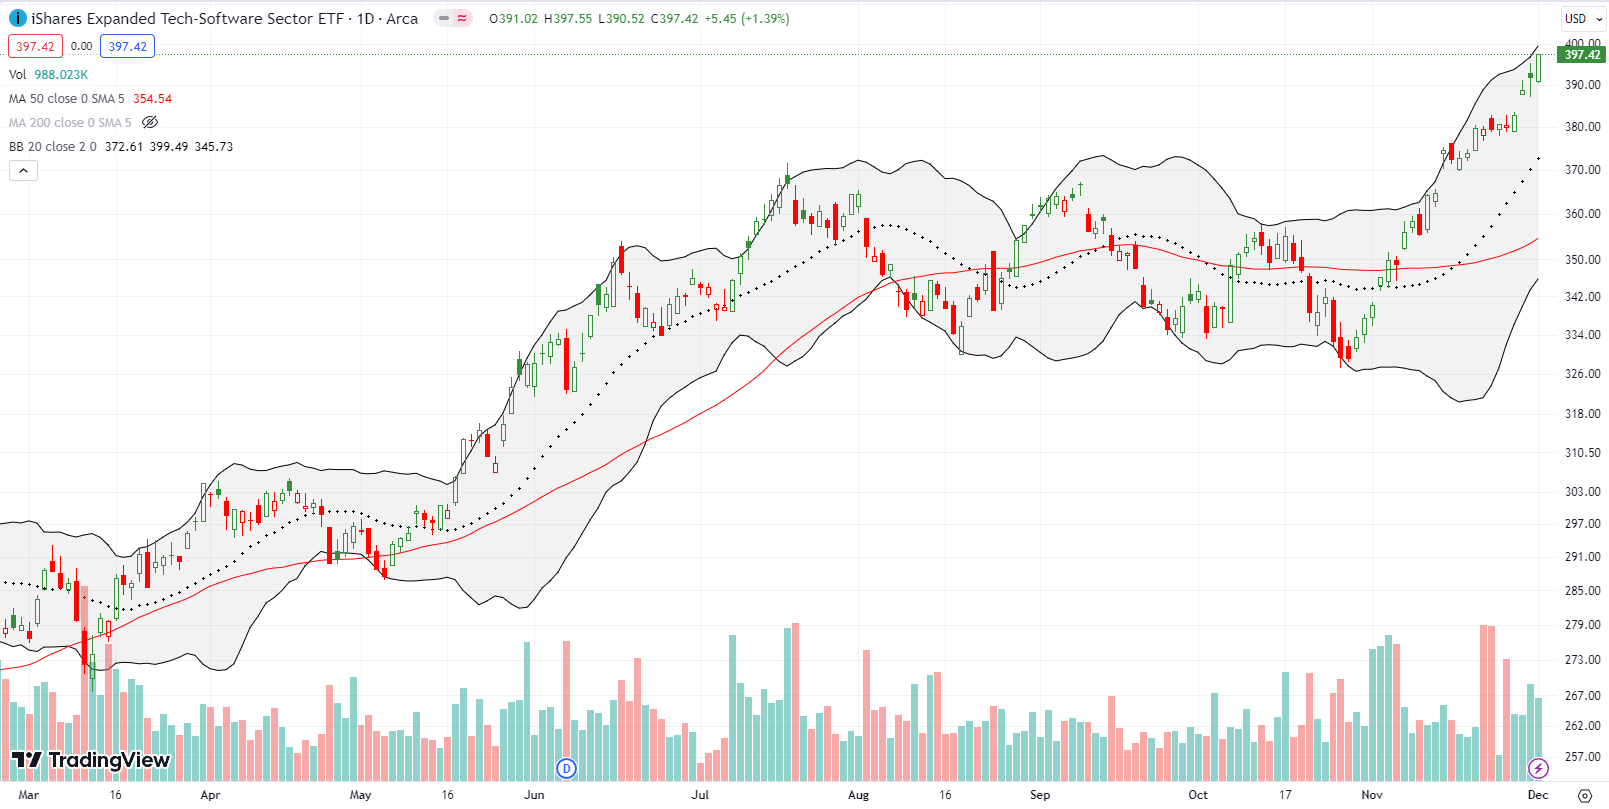 iShares Expanded Tech-Software Sector ETF (IGV) continued its steady upward trend and finished reversing its 2022 losses.